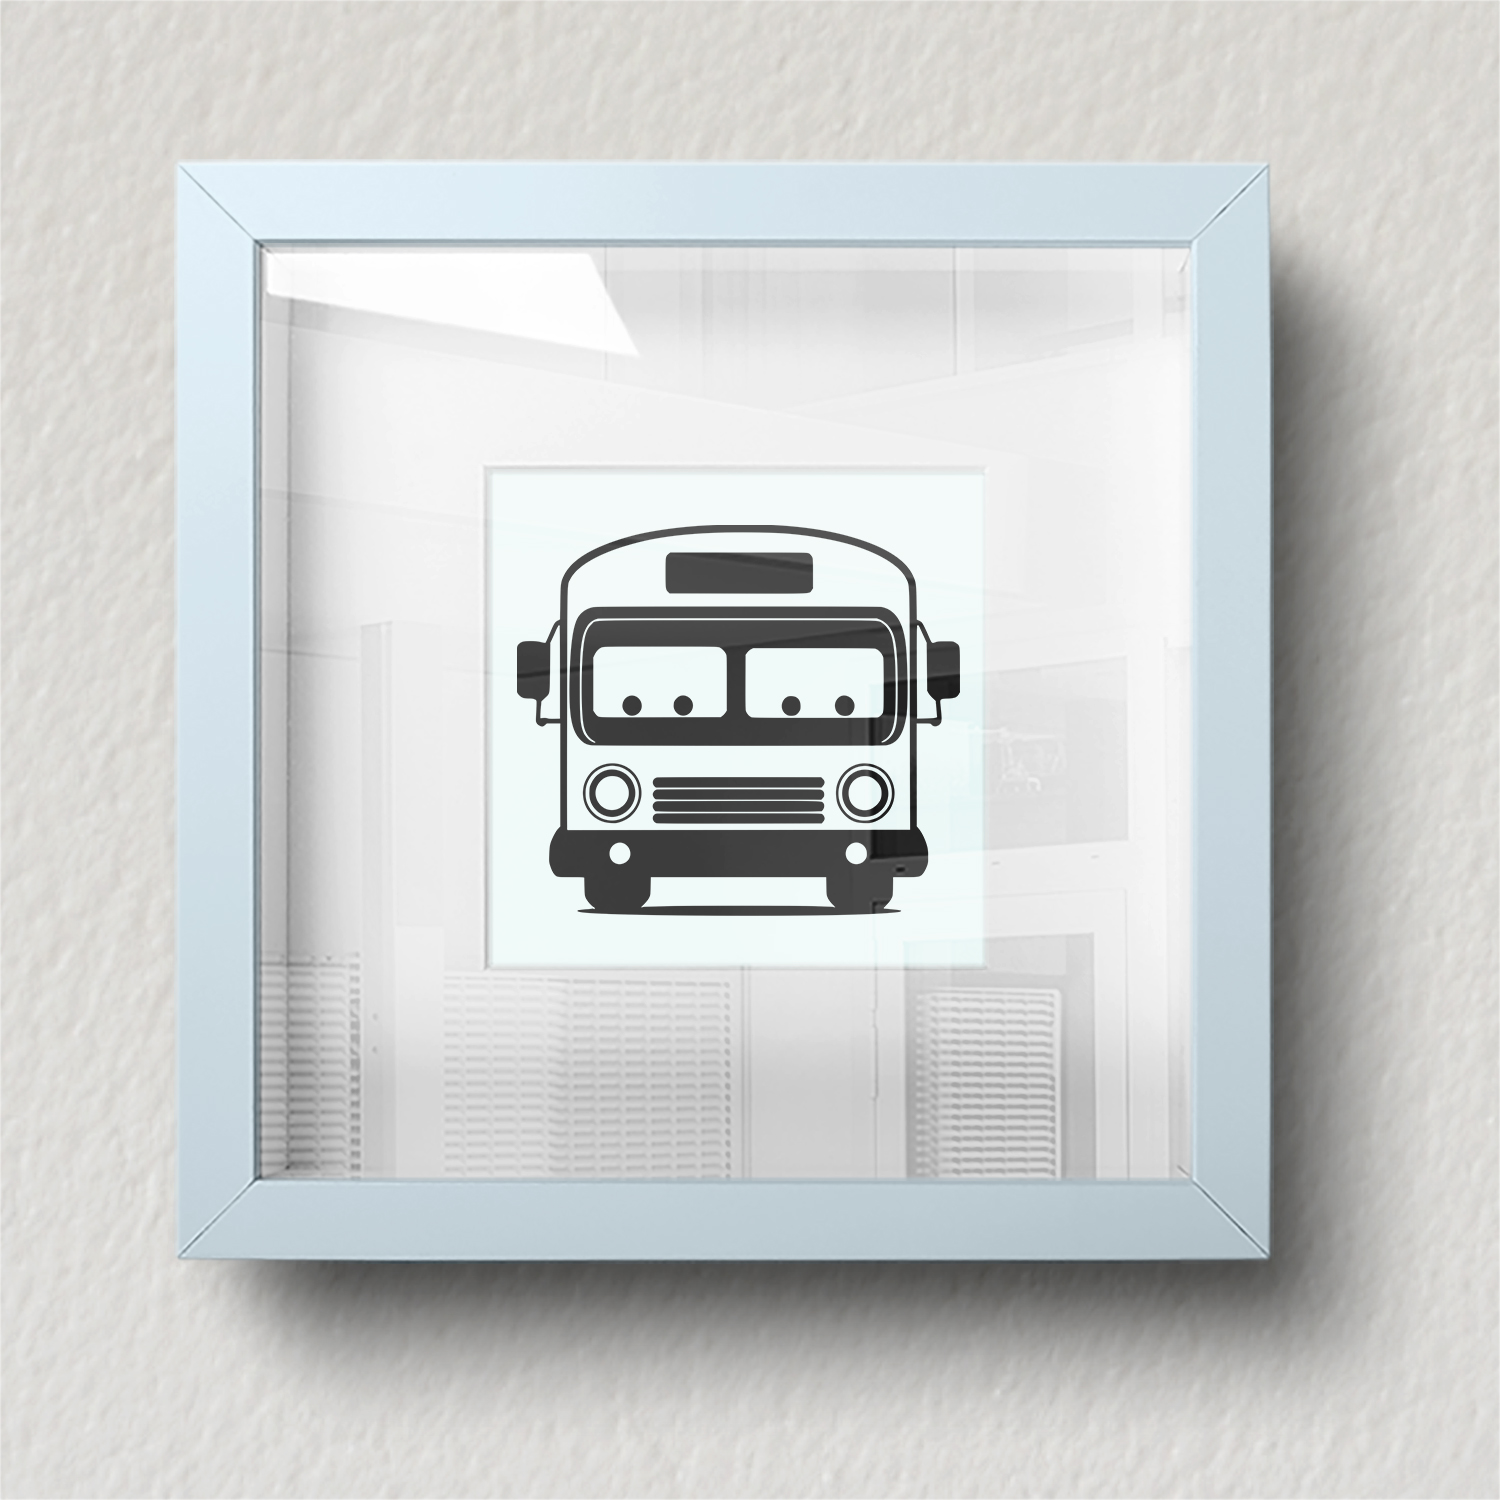 SVG Image: Adorable Bus Tags for Cricut, Silhouette, and Laser Machines